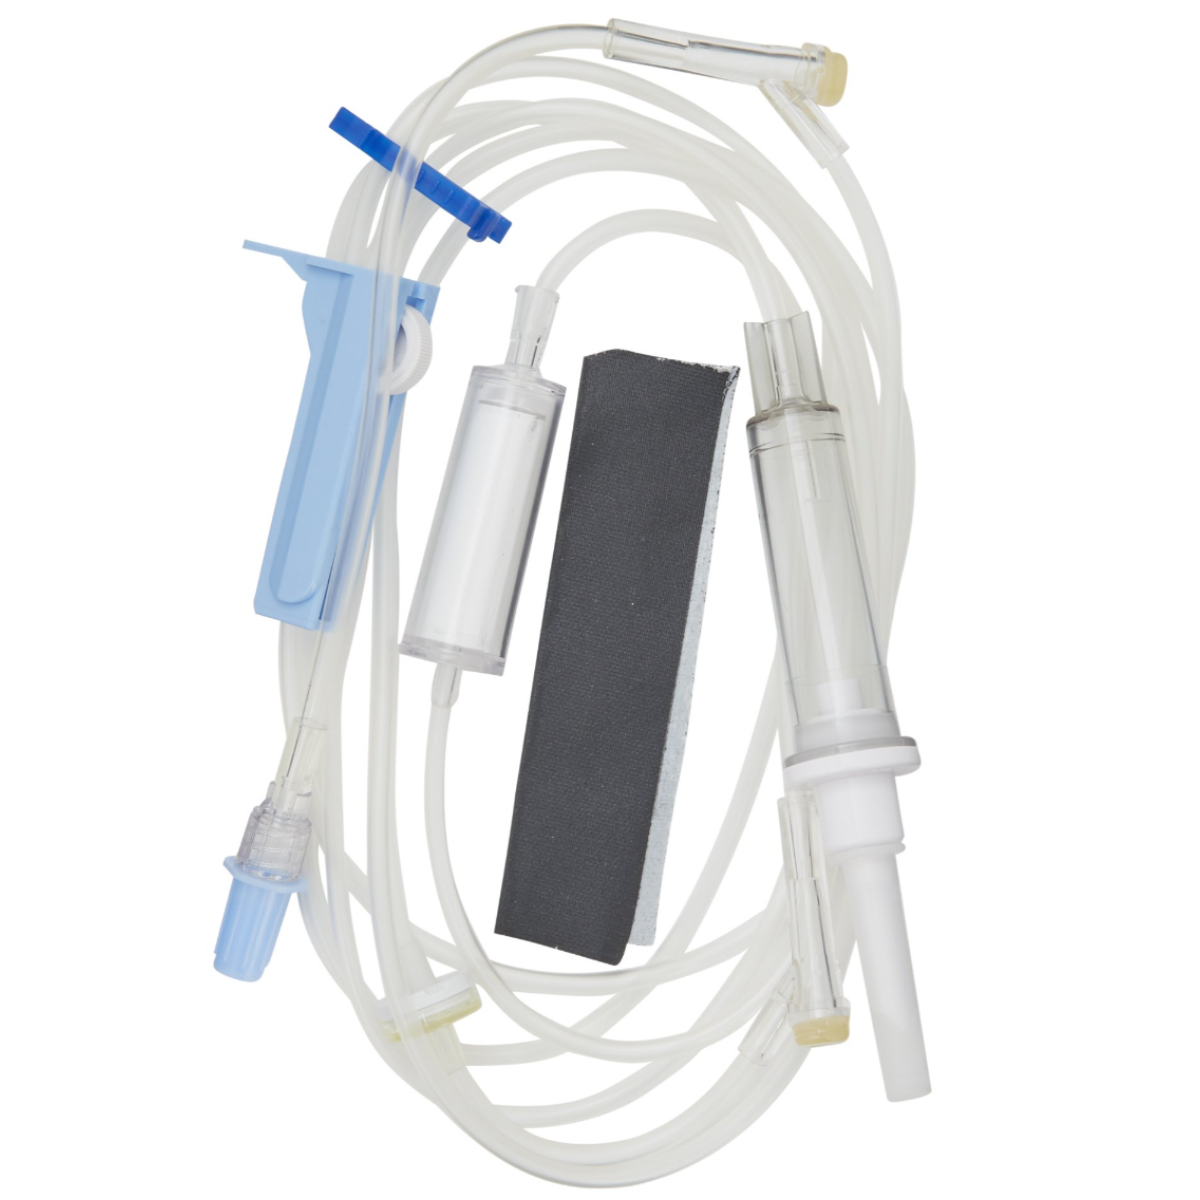  Baxter Healthcare 2N8374 Straight-Type Catheter Extension Set,  Microbore, Clearlink Luer Activated Valve, 7.9, Pack of 50 : Industrial &  Scientific